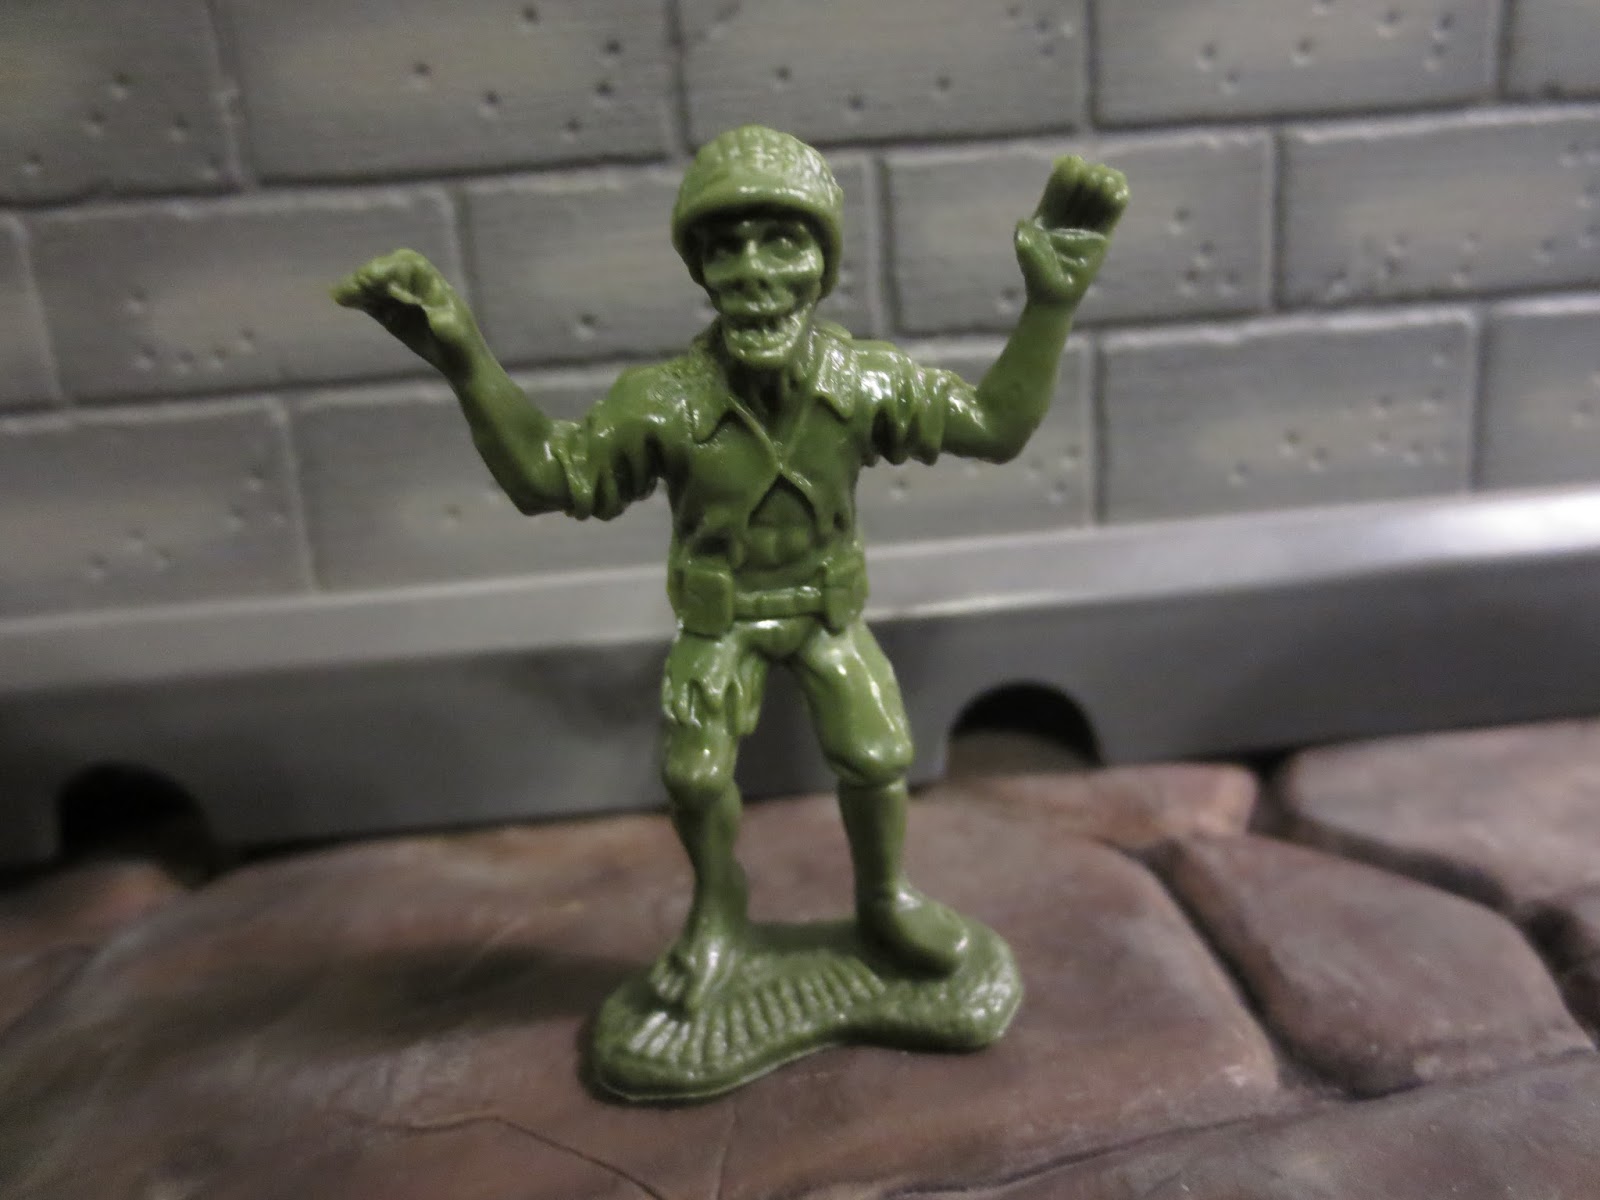 Zombie Army Builder action figure - Another Pop Culture